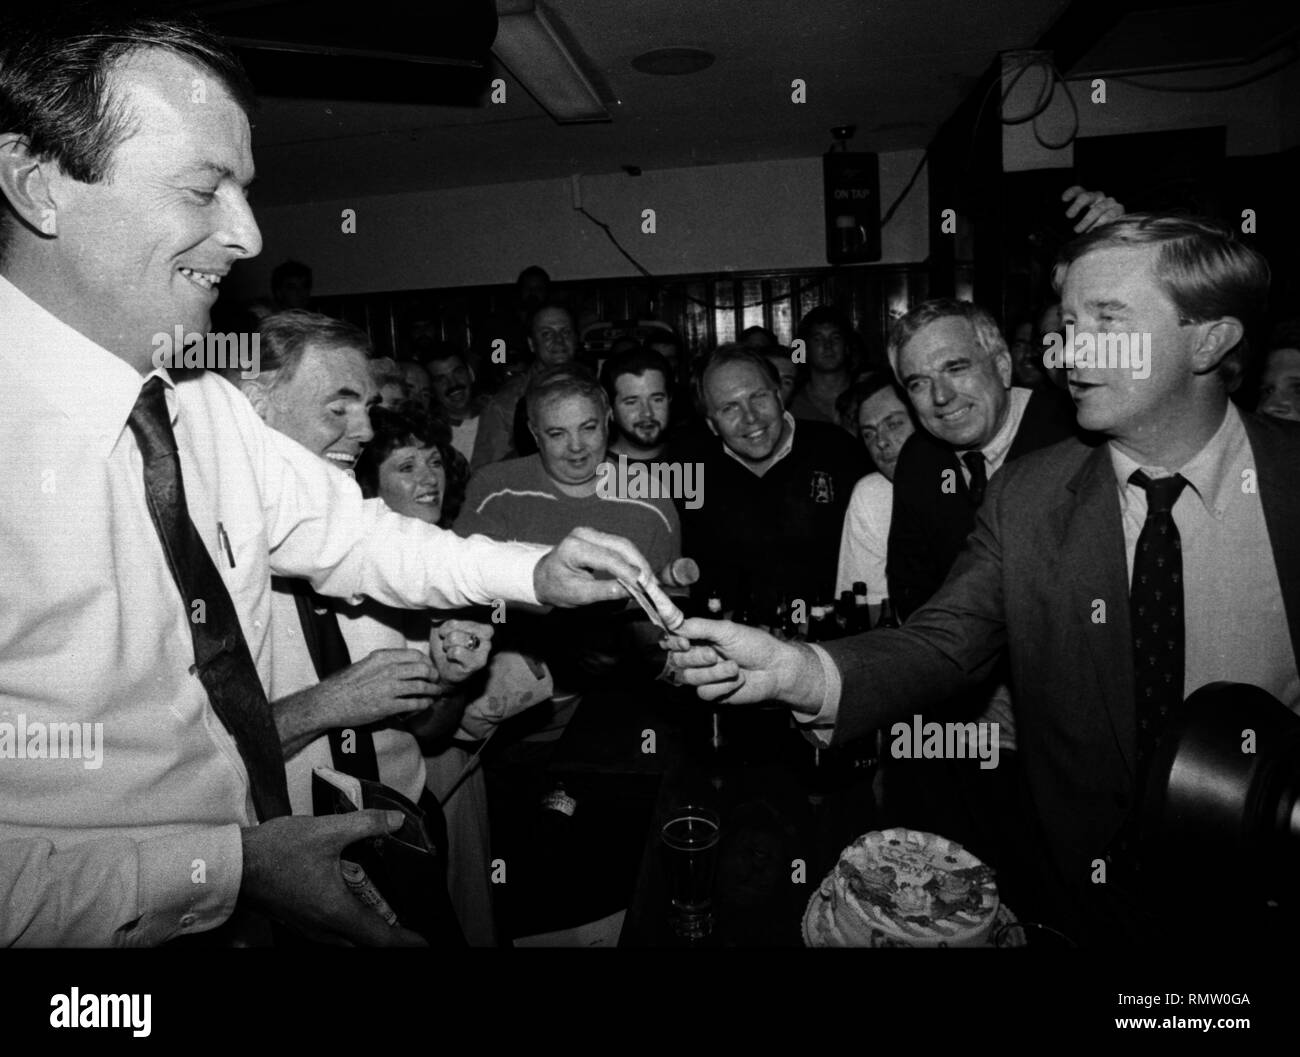 Former Massachusetts Governor Bill Weld announced he will run against President Donald Trump for the Republican Presidential nomination in 2020. in this photo Massachusetts Governor Bill Weld pays his tab to Jerry Foley (left) during a campaign event at Foley's Tavern in Boston Ma USA photo by bill Belknap 1995 Stock Photo